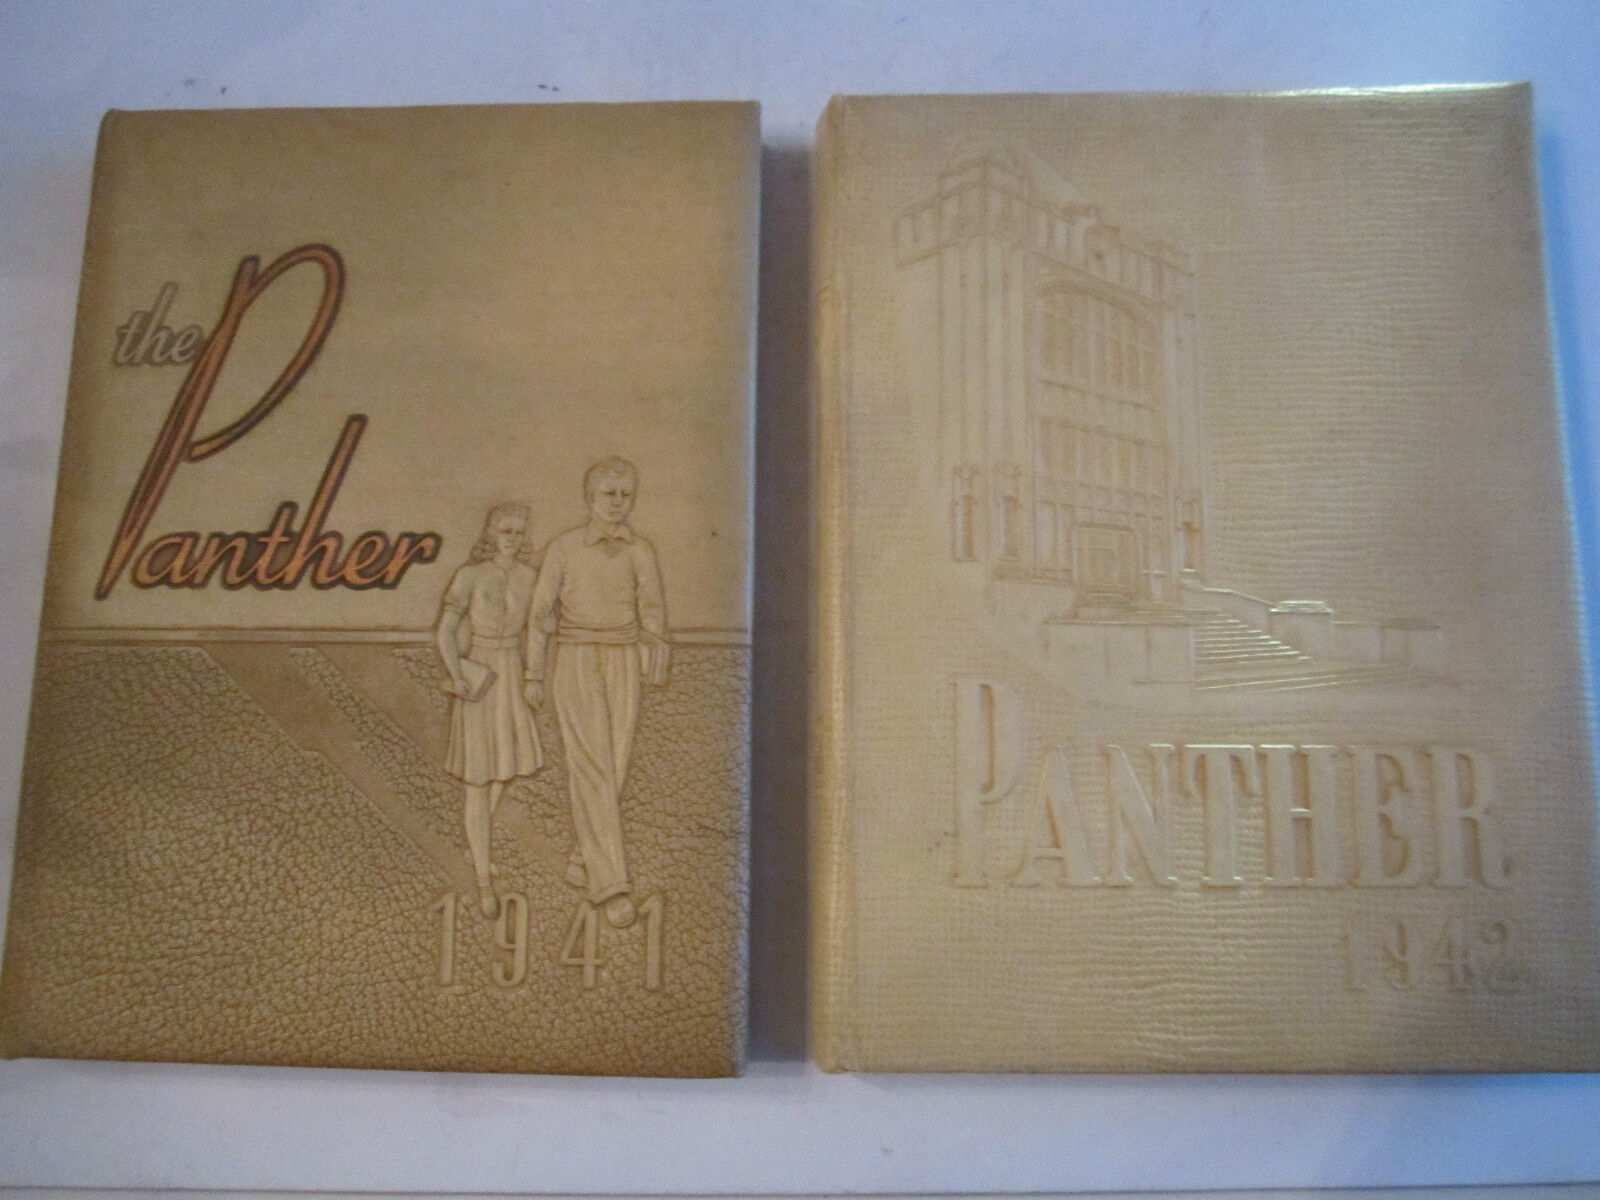 1941 & 1942 PANTHER YEARBOOKS - ROBERT LE PASCHAL SENIOR HIGH SCHOOL YEAR BOOKS